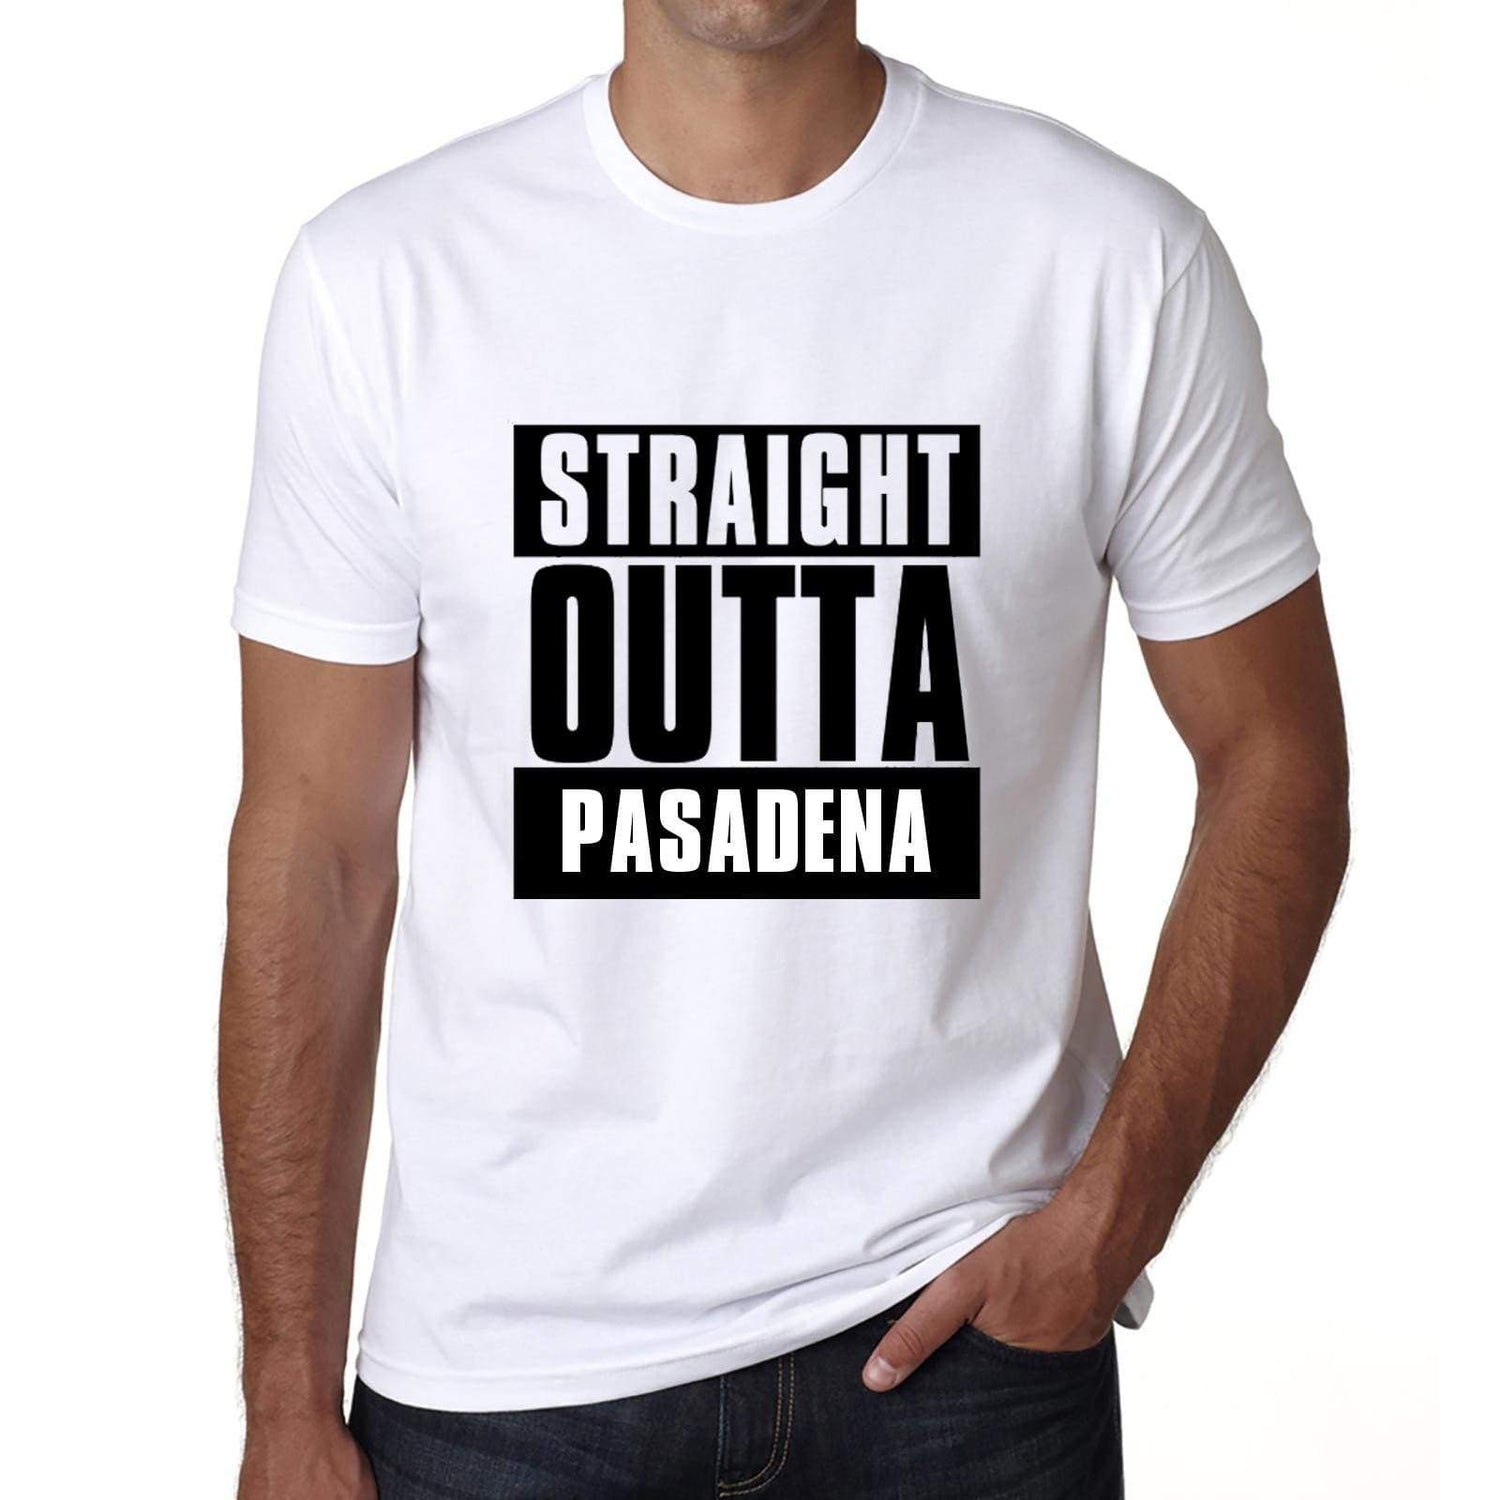 Straight Outta Pasadena Mens Short Sleeve Round Neck T-Shirt 00027 - White / S - Casual